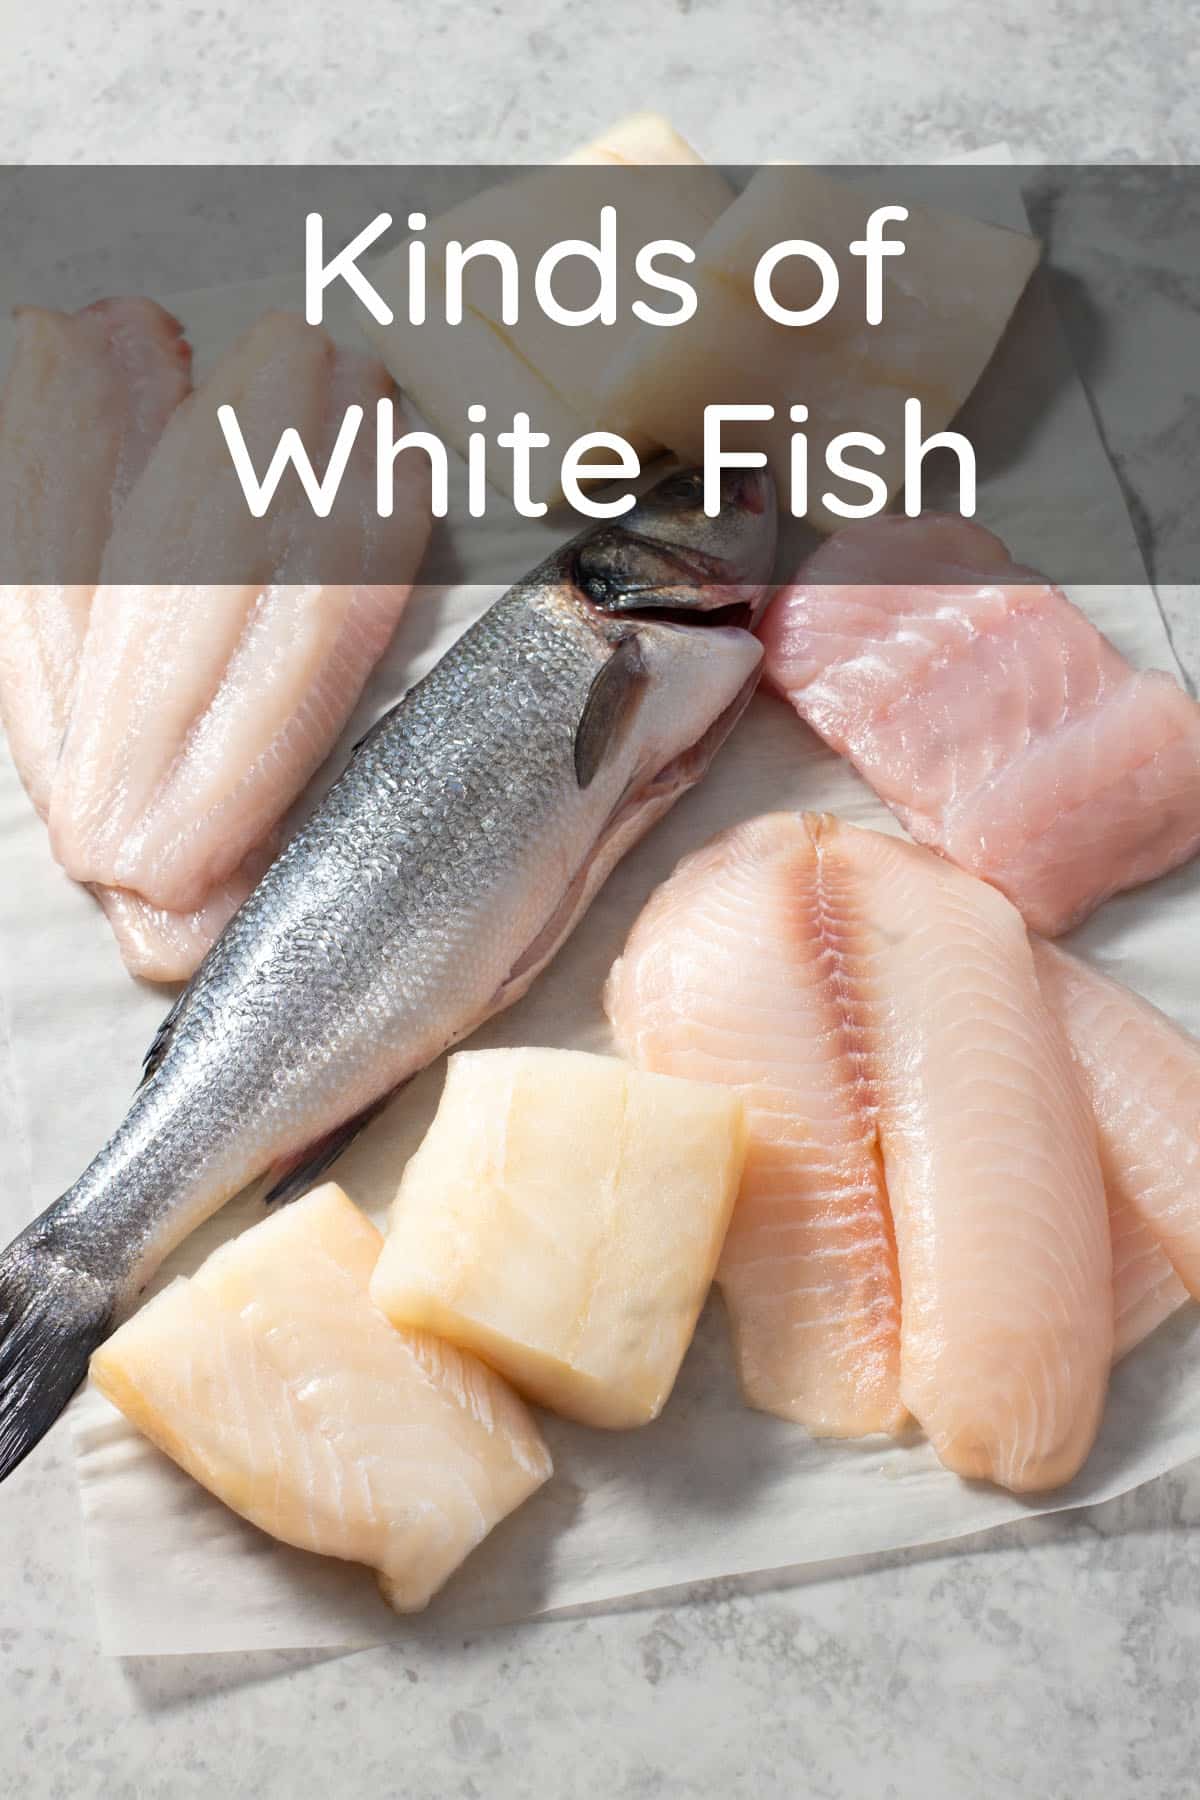 Kinds of White Fish